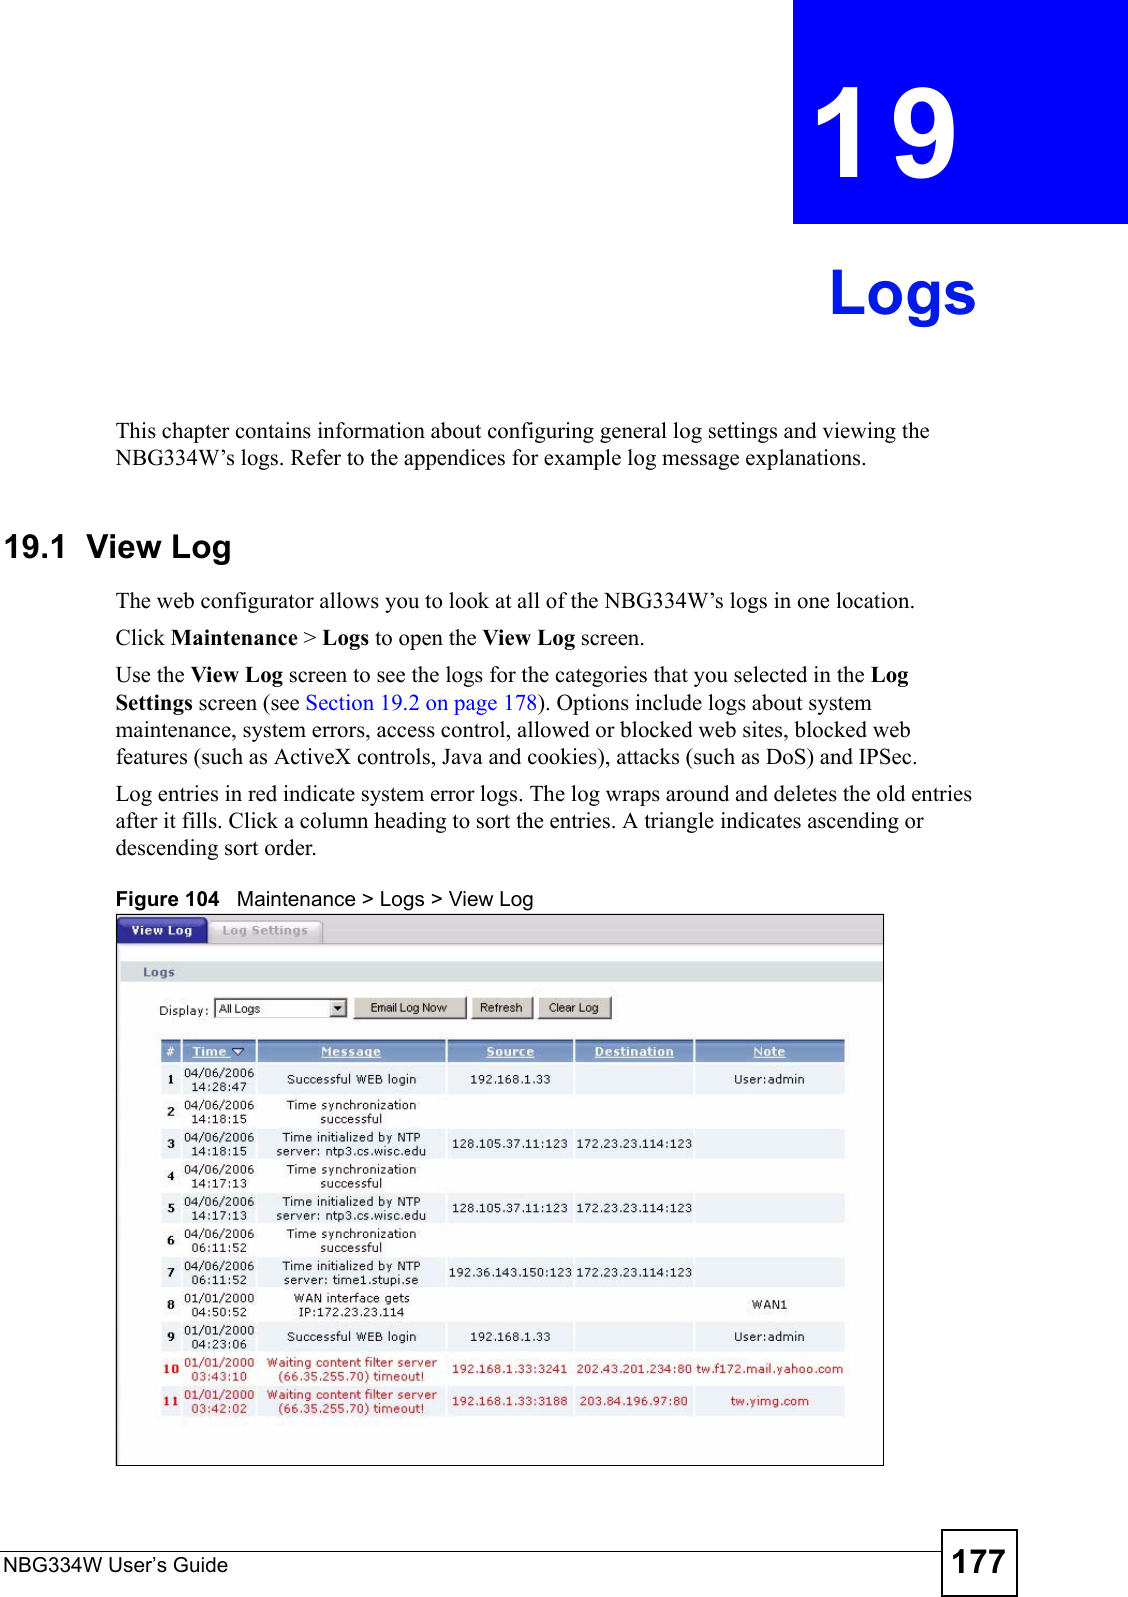 NBG334W User’s Guide 177CHAPTER  19 LogsThis chapter contains information about configuring general log settings and viewing the NBG334W’s logs. Refer to the appendices for example log message explanations.19.1  View Log The web configurator allows you to look at all of the NBG334W’s logs in one location. Click Maintenance &gt; Logs to open the View Log screen. Use the View Log screen to see the logs for the categories that you selected in the Log Settings screen (see Section 19.2 on page 178). Options include logs about system maintenance, system errors, access control, allowed or blocked web sites, blocked web features (such as ActiveX controls, Java and cookies), attacks (such as DoS) and IPSec.Log entries in red indicate system error logs. The log wraps around and deletes the old entries after it fills. Click a column heading to sort the entries. A triangle indicates ascending or descending sort order. Figure 104   Maintenance &gt; Logs &gt; View Log 